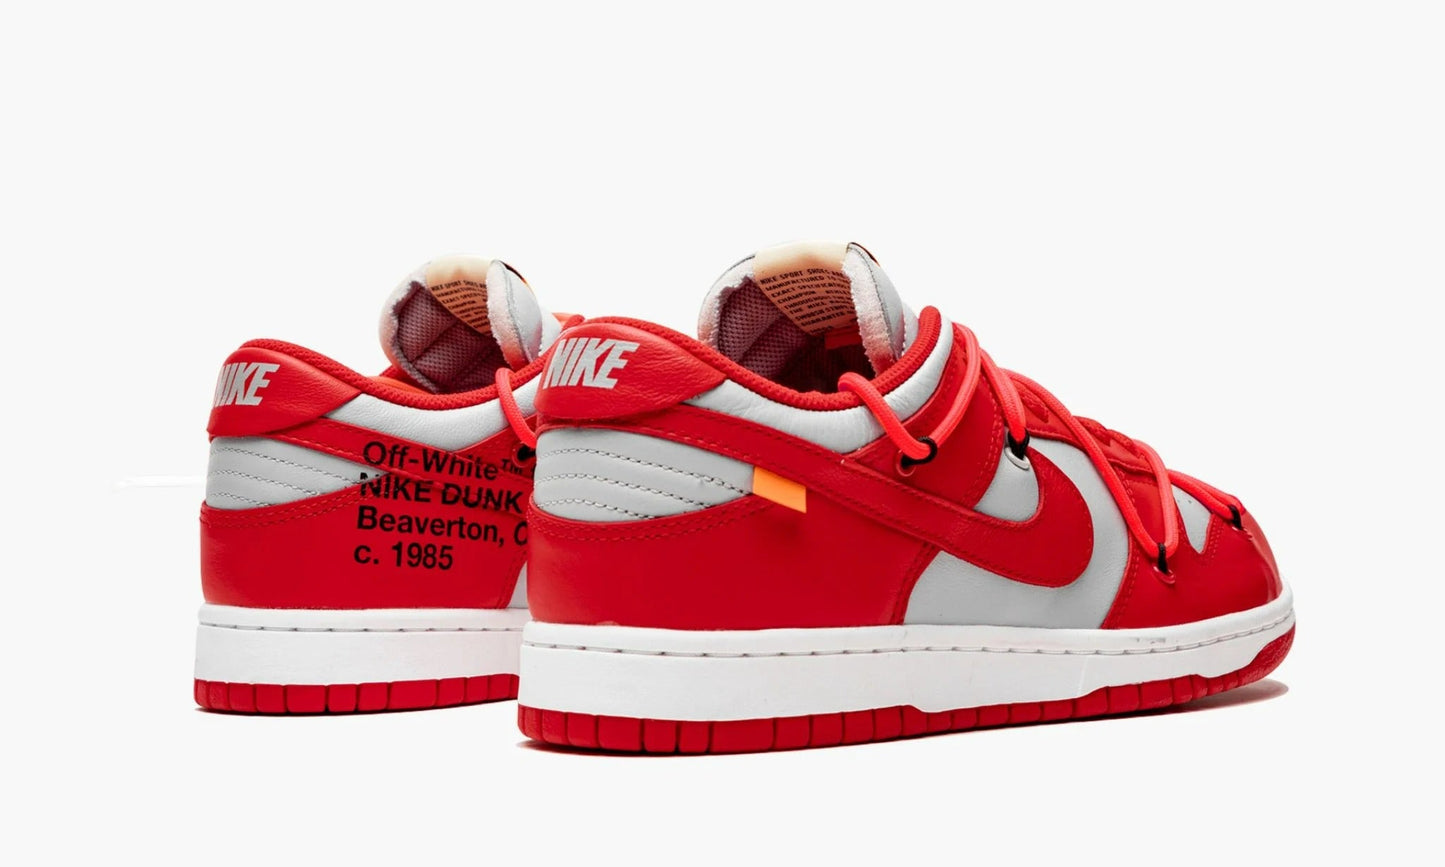 Dunk Low Off-White University Red - CT0856 600 